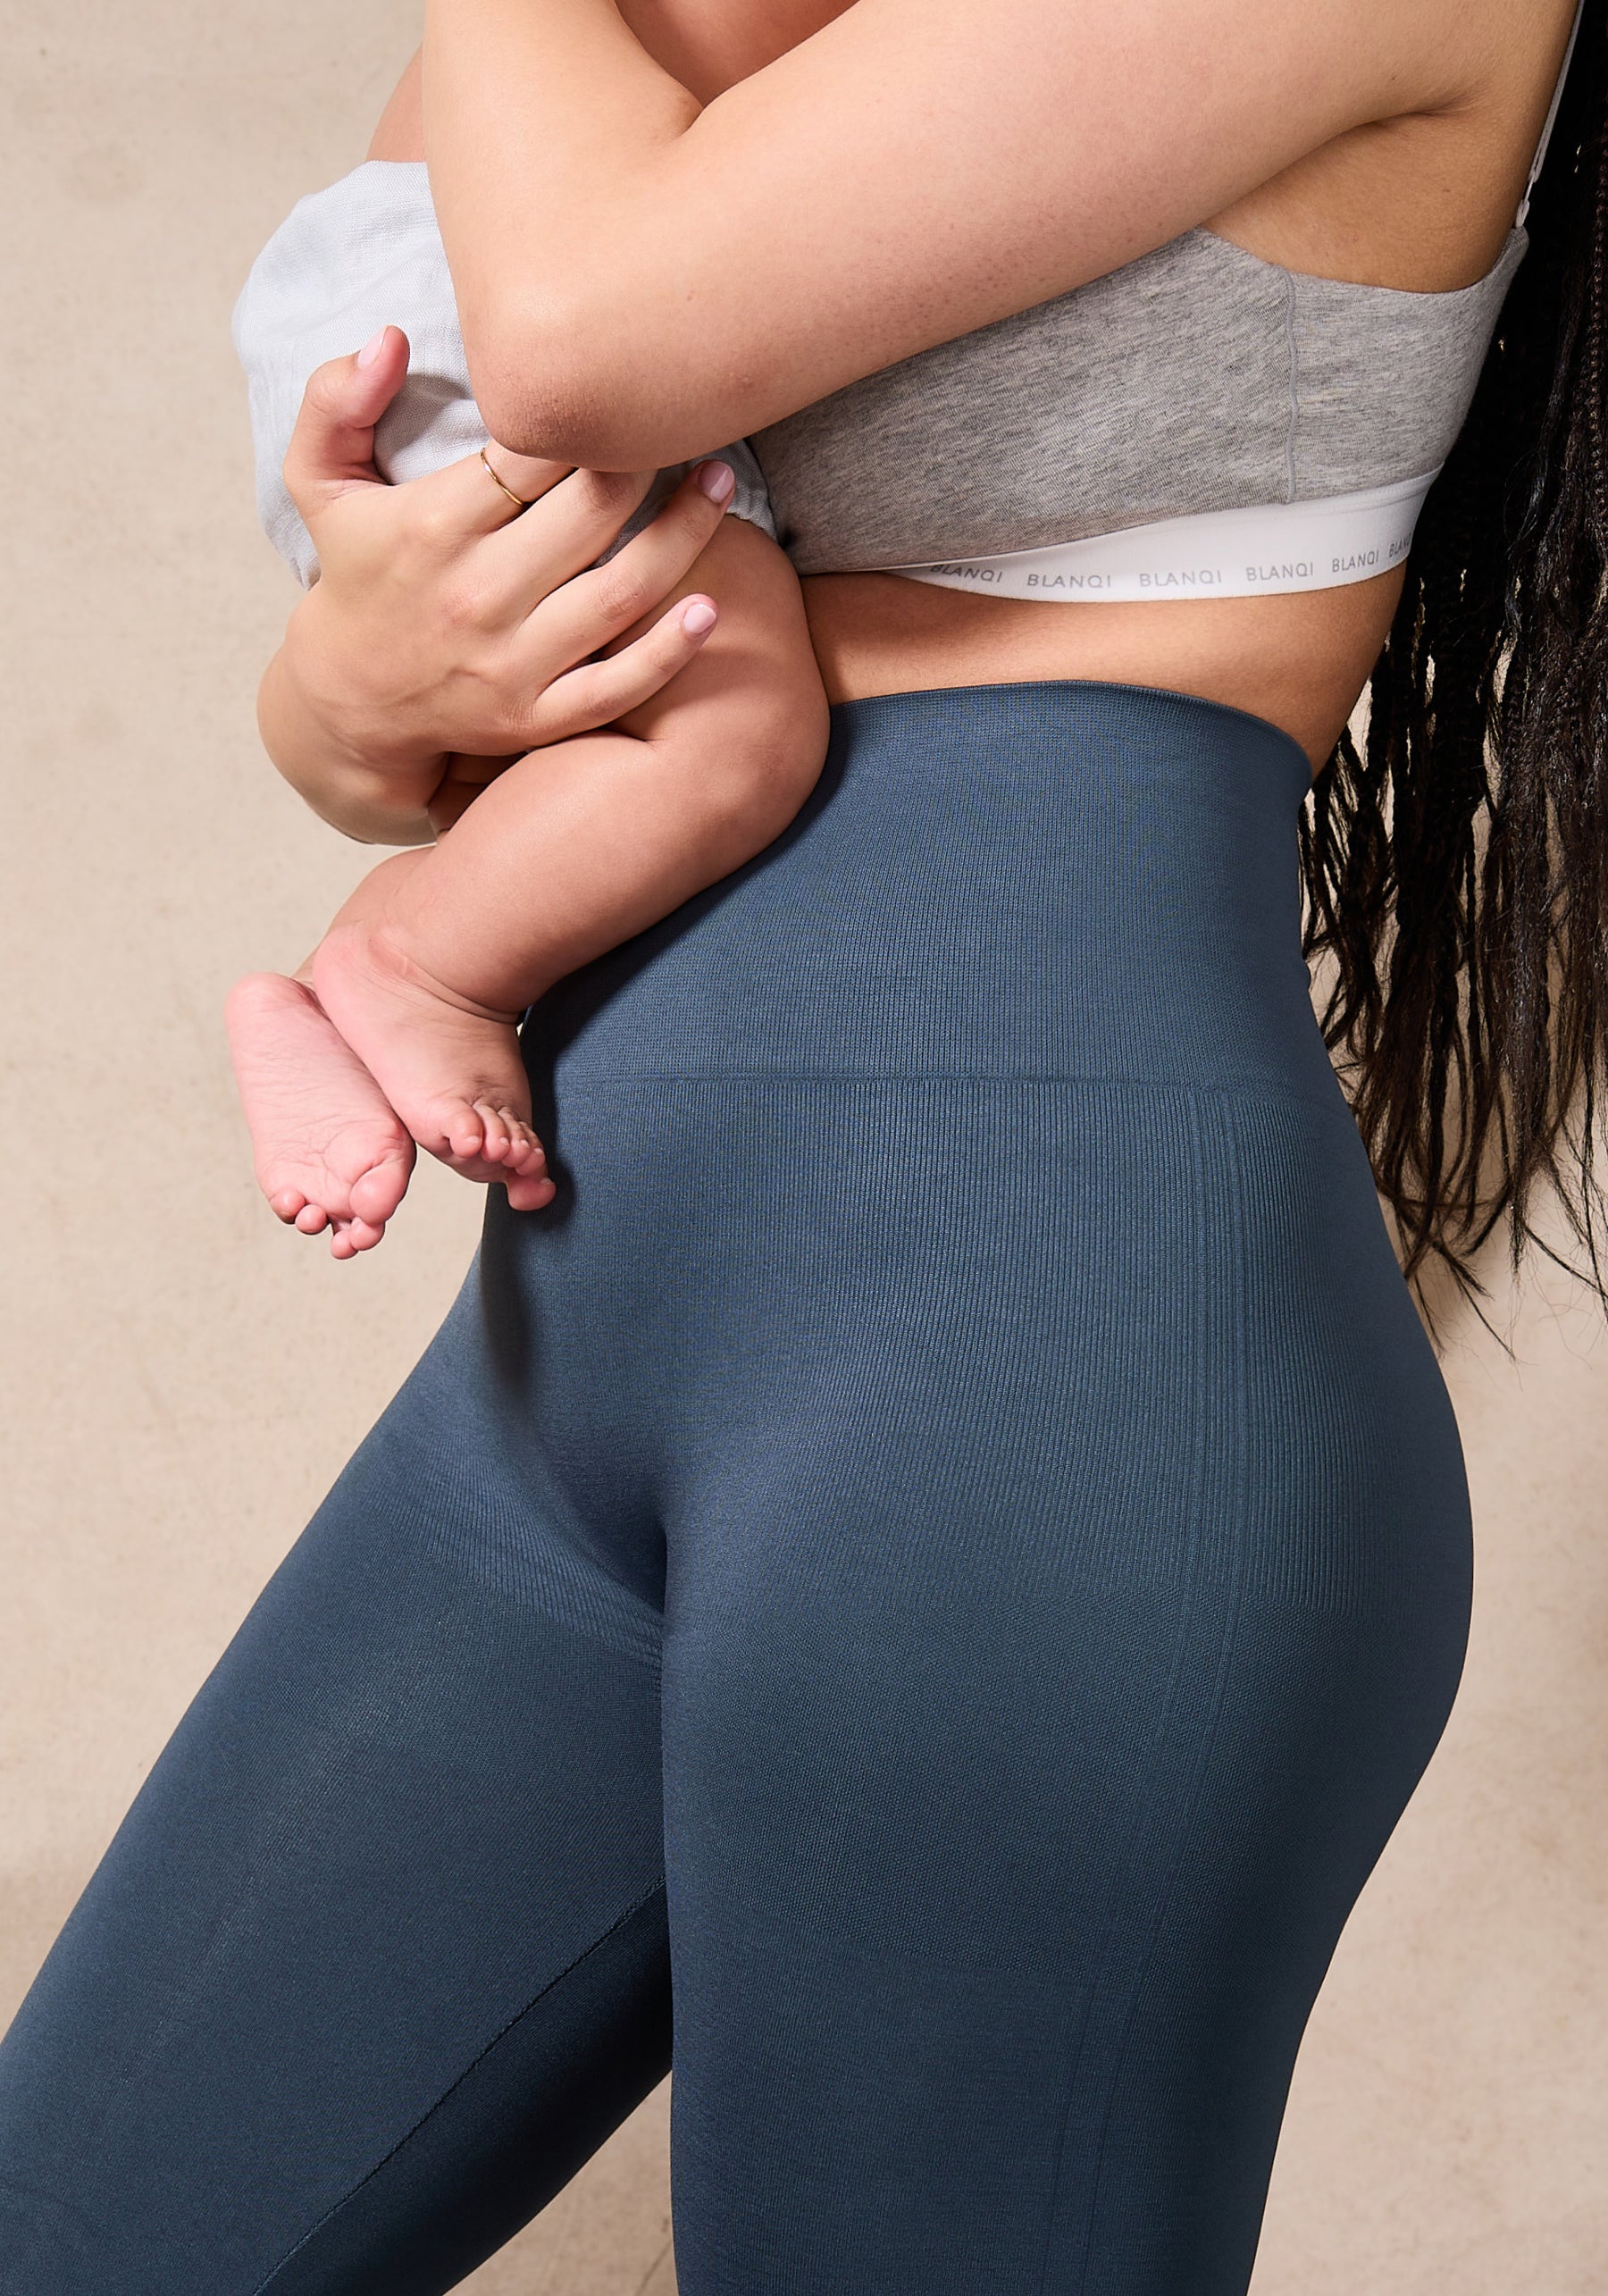 BLANQI® Everyday™ Hipster Support Leggings  Support leggings, Everyday  leggings, Postpartum leggings